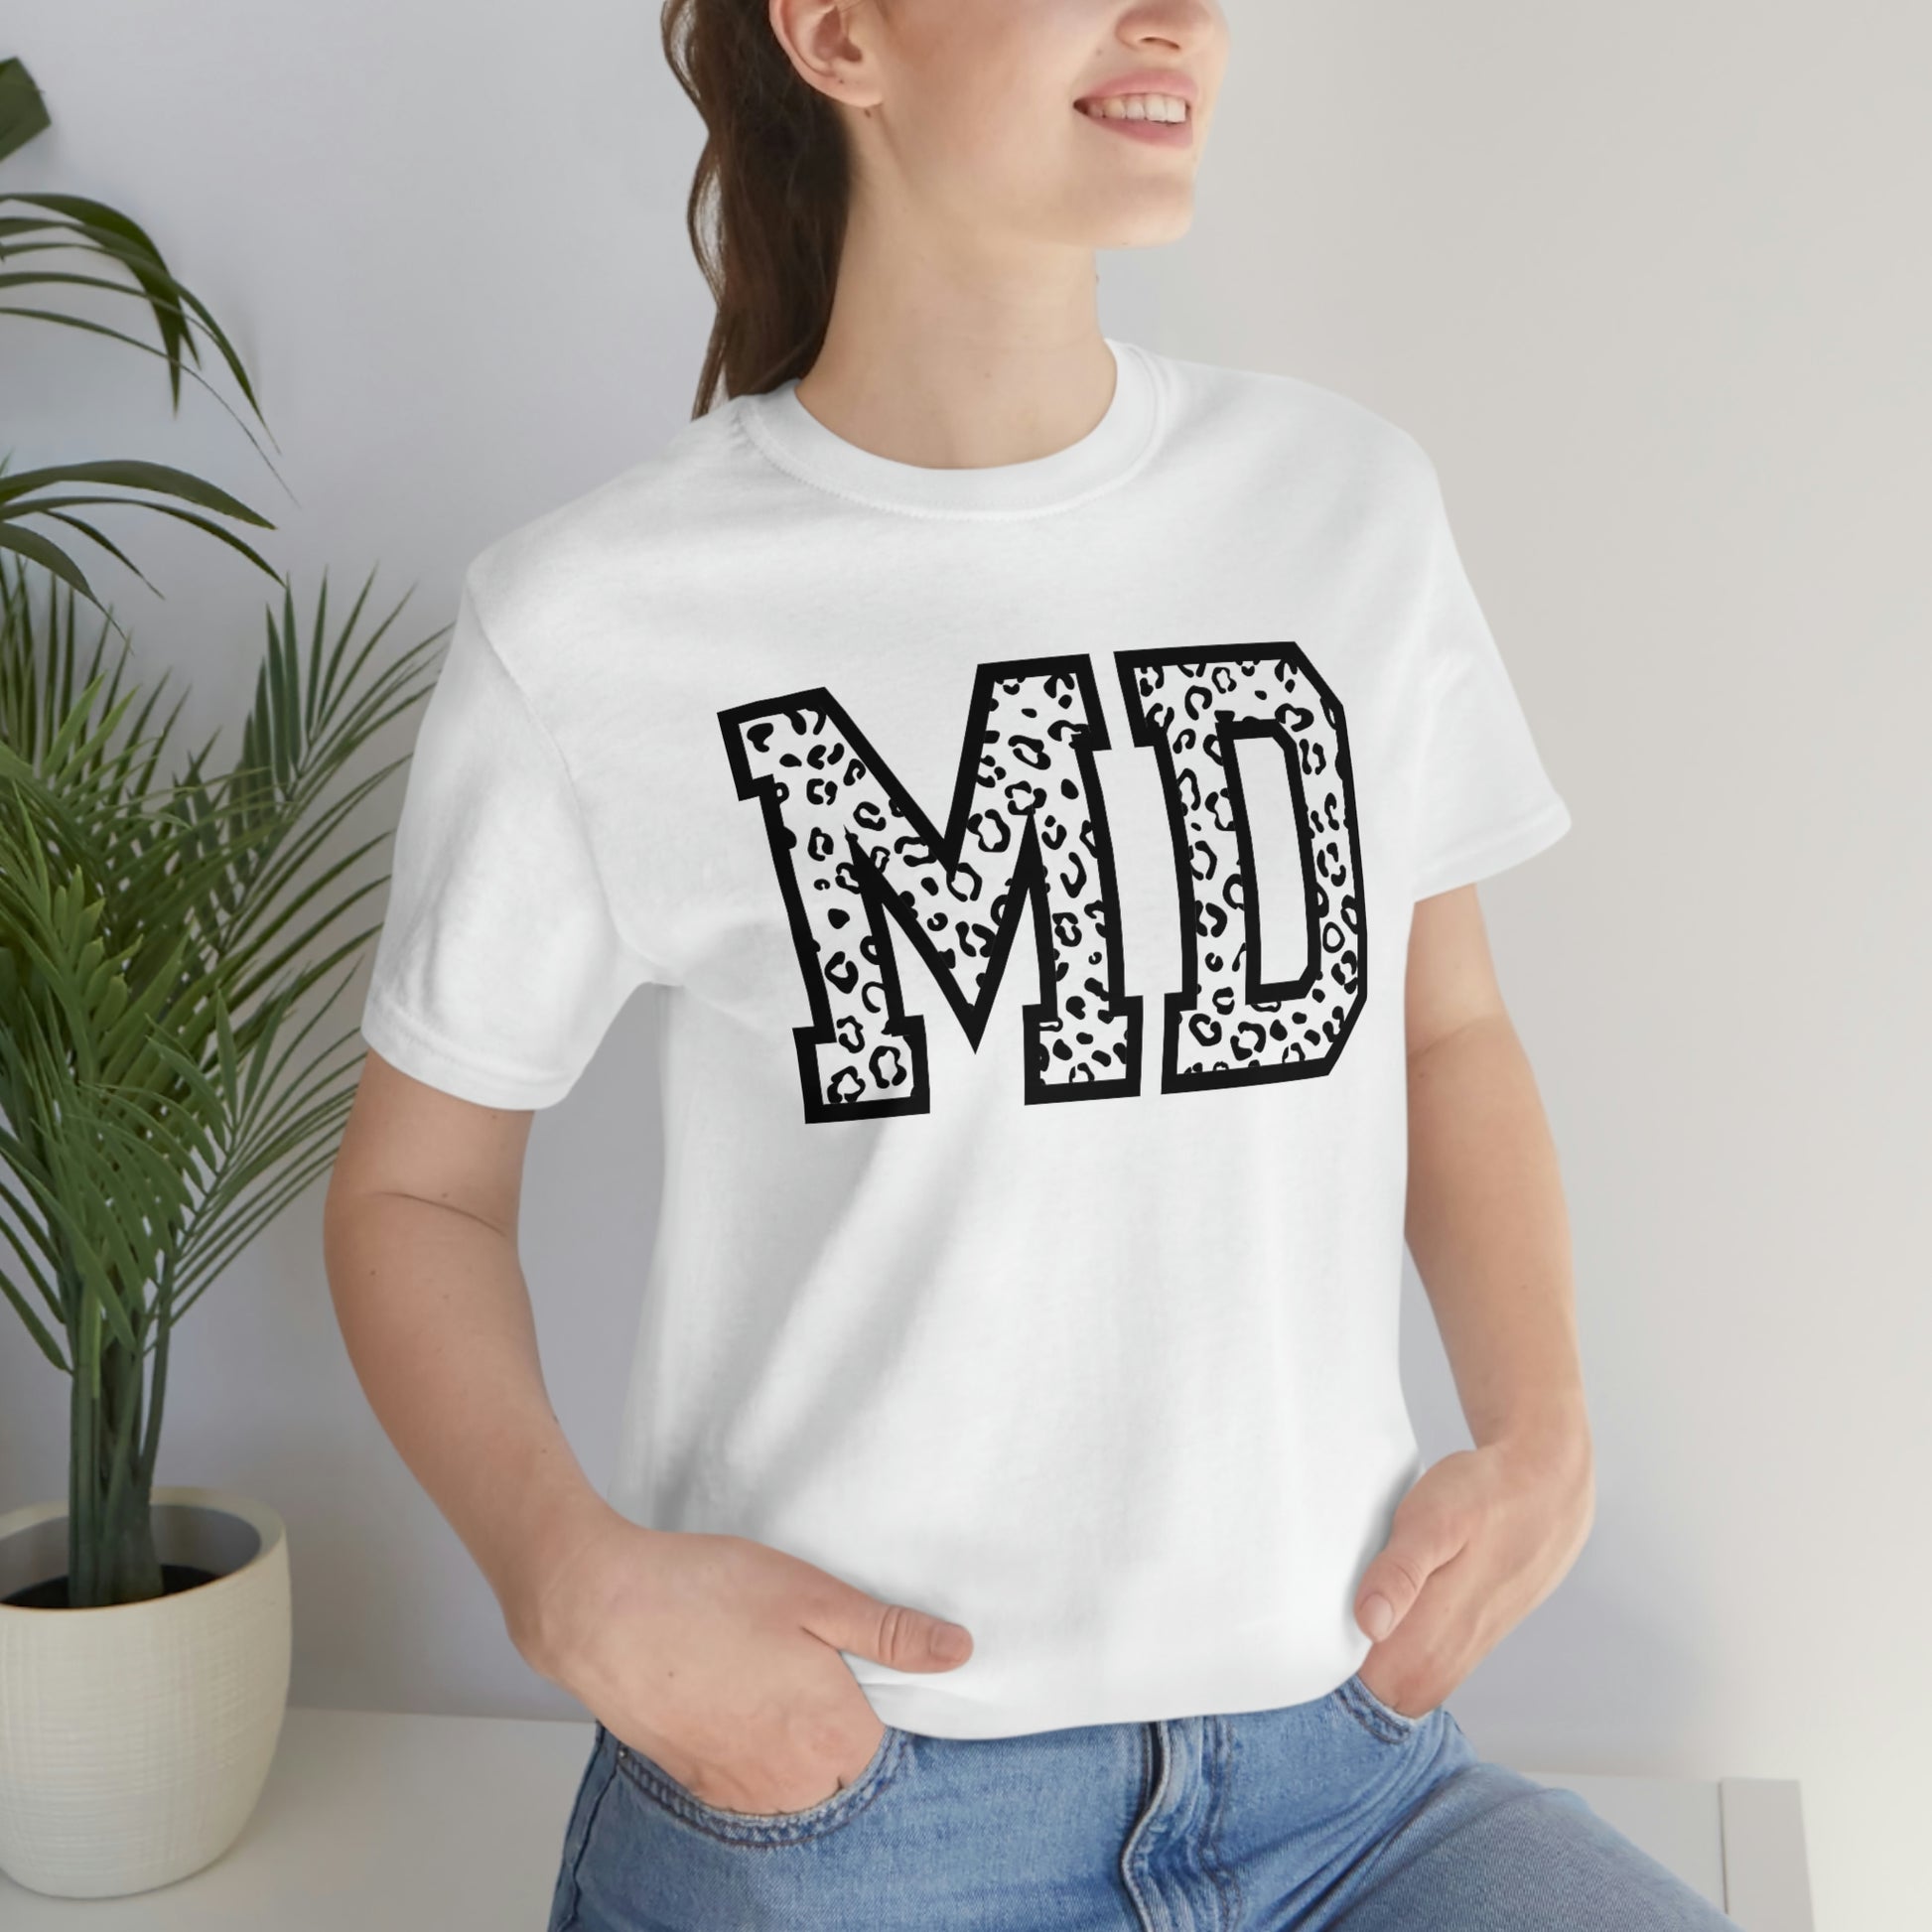 Maryland MD Leopard Print Letters Short Sleeve T-shirt